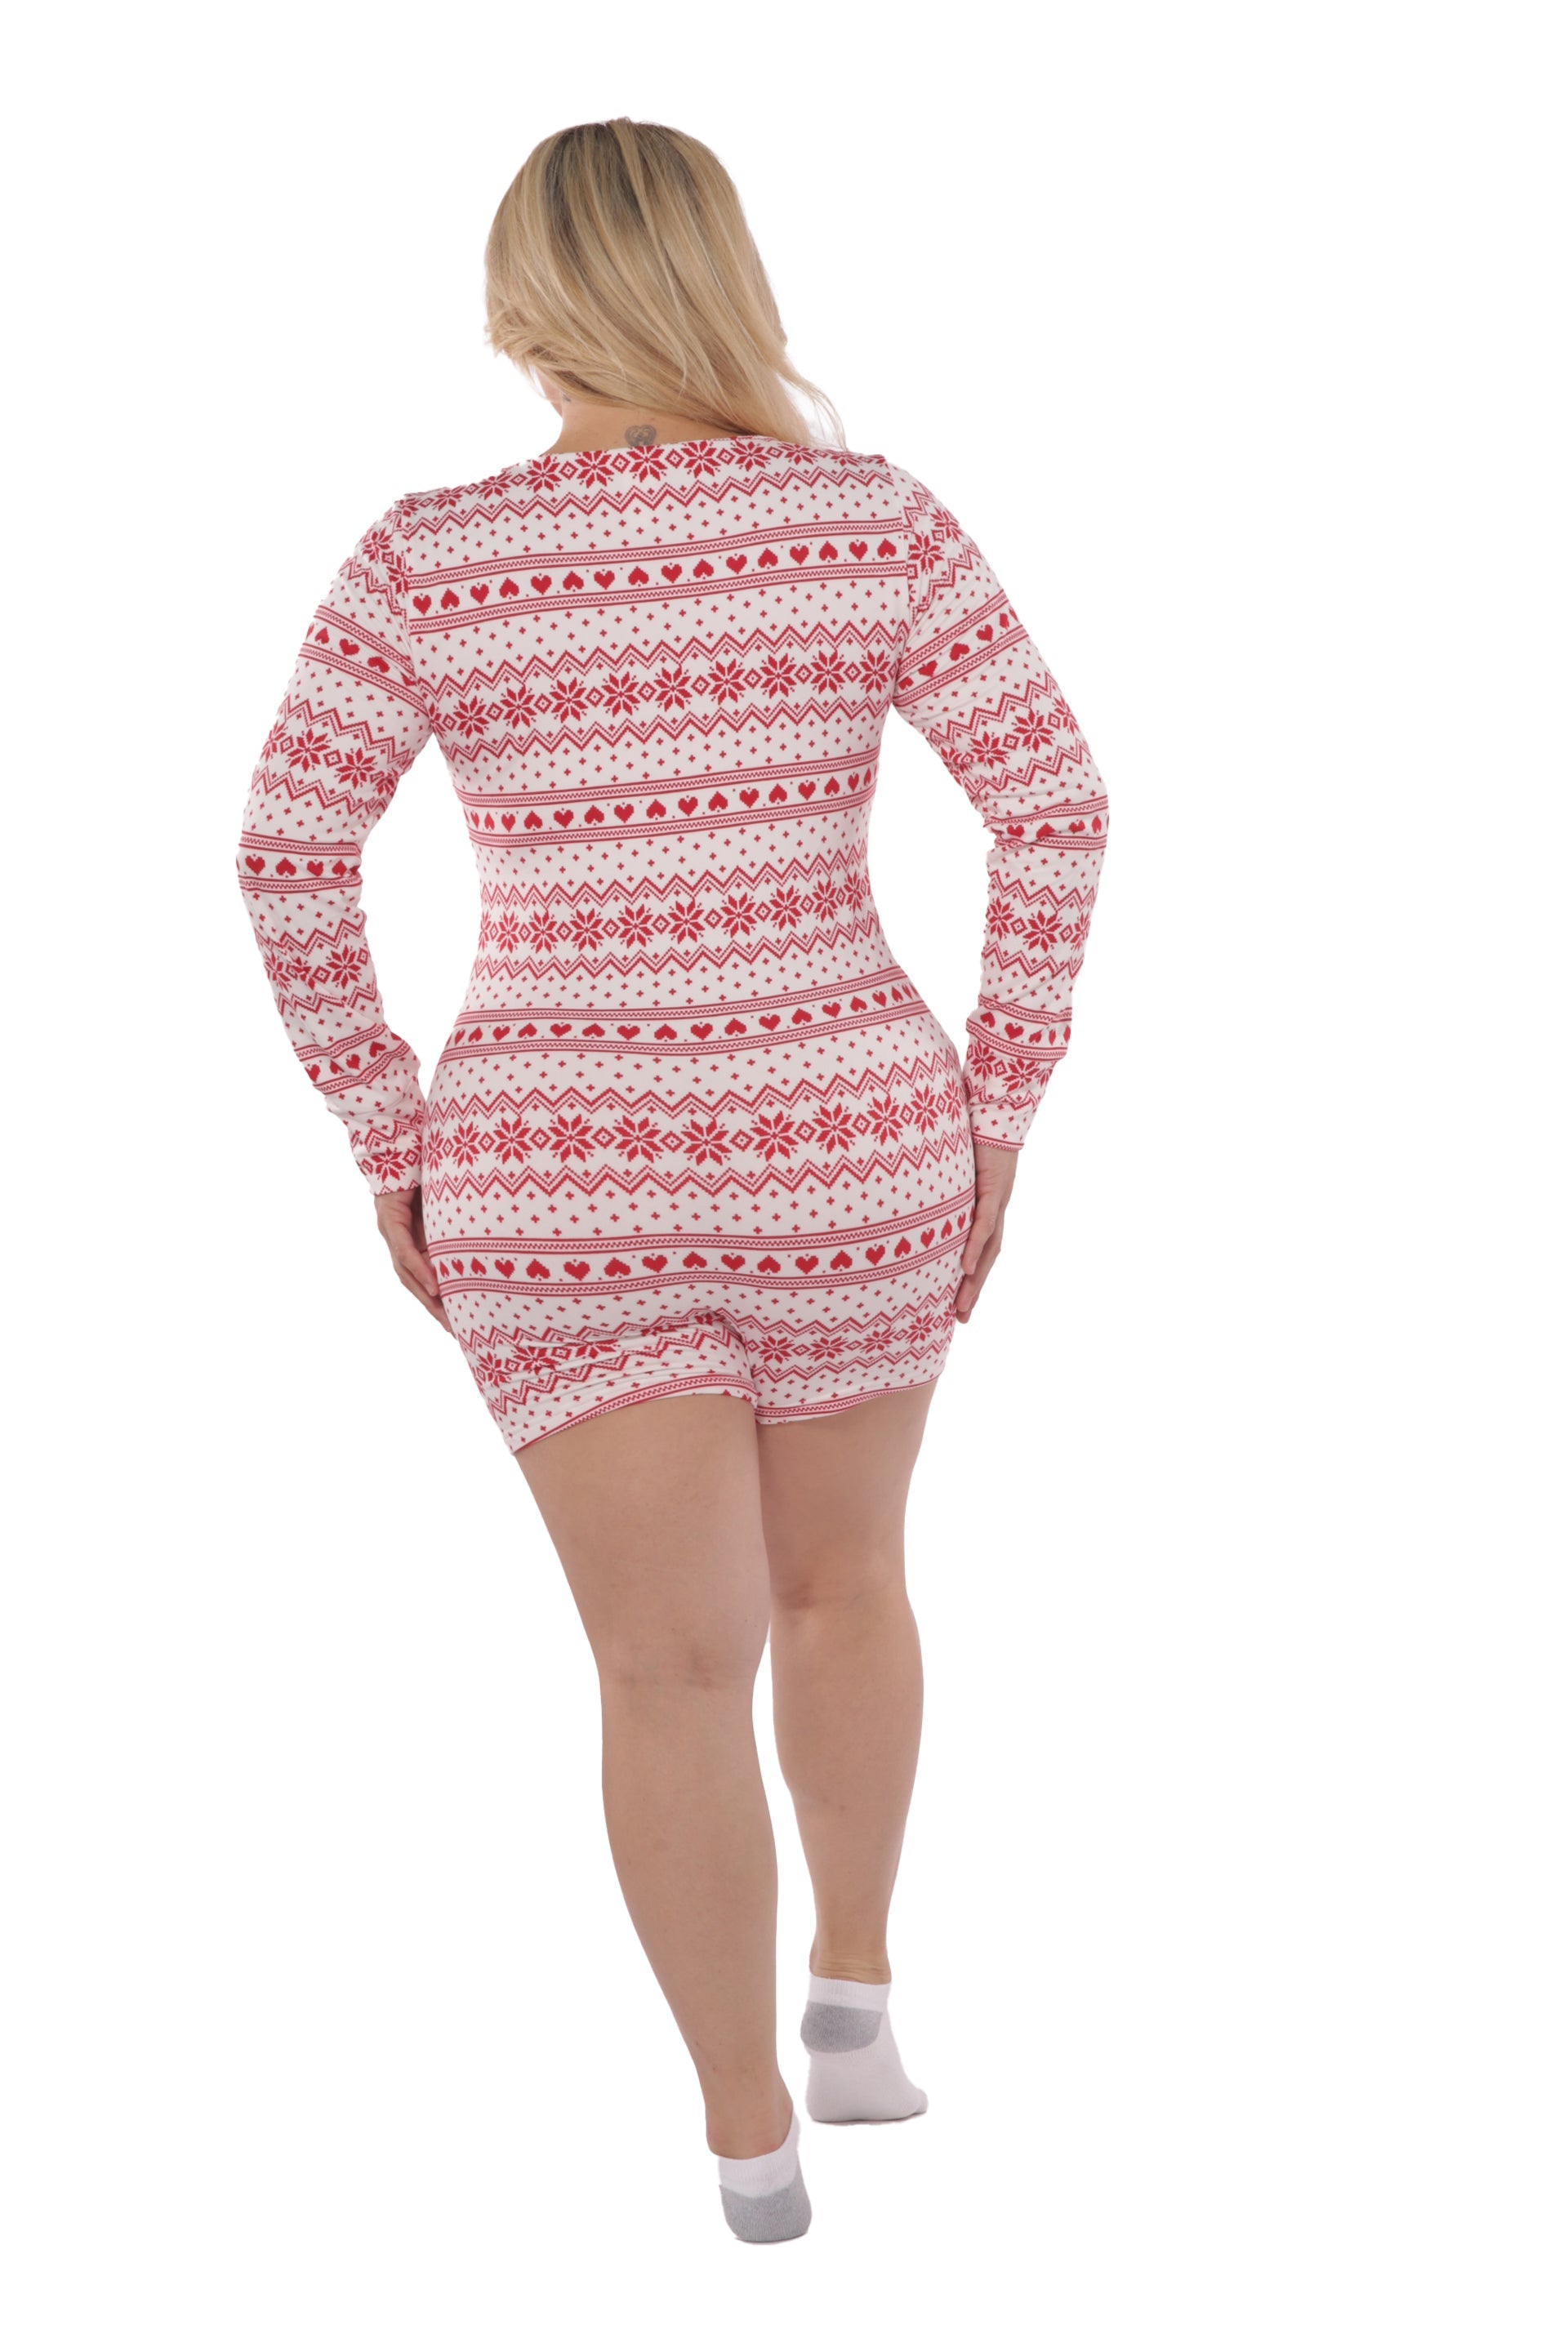 Wholesale Womens Plus Size Holiday Print Fleece Lined Romper Onesie - White & Red